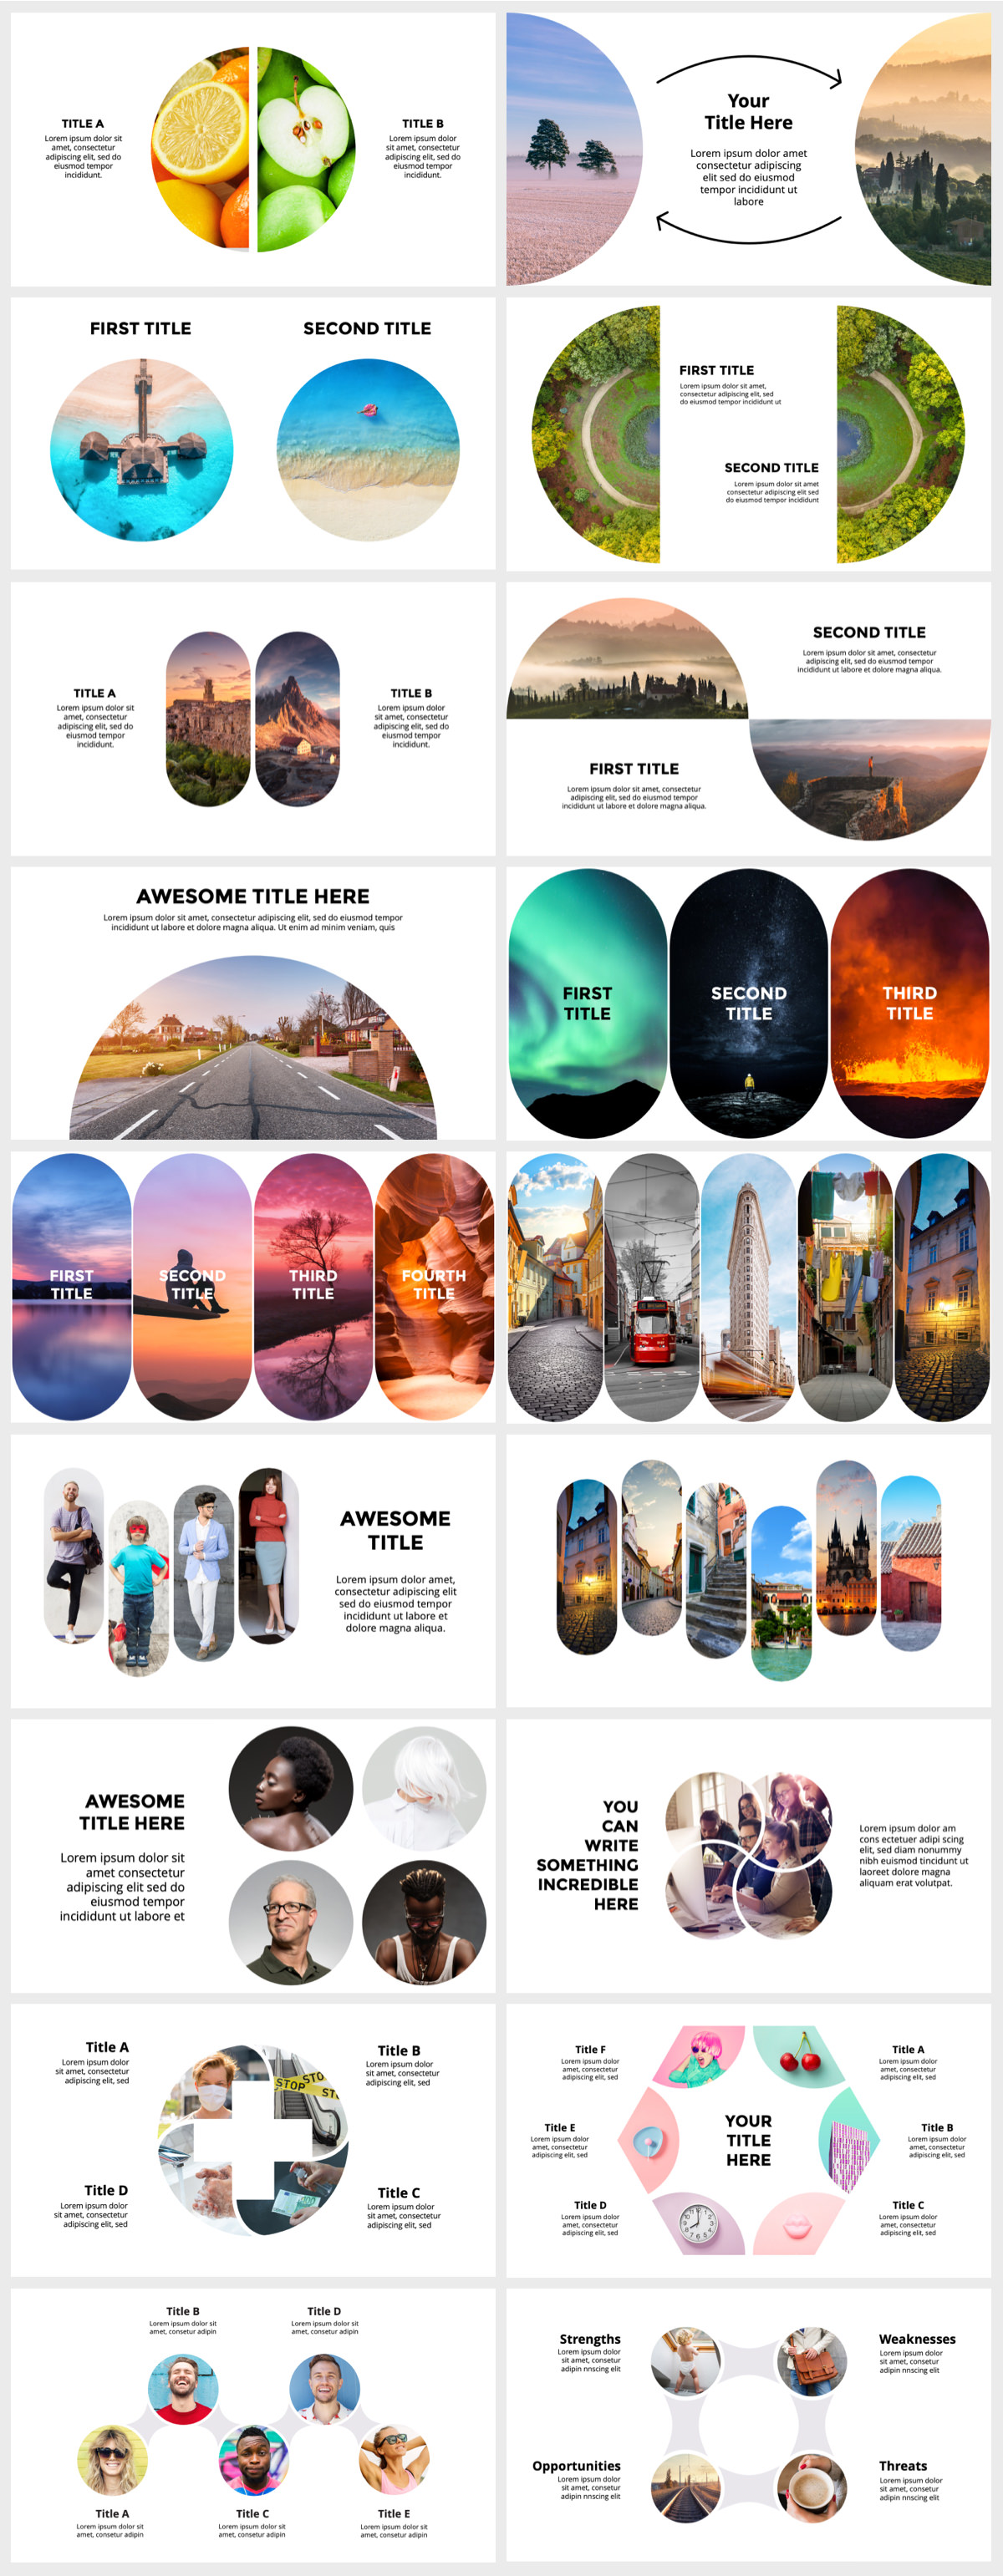 Wowly - 3500 Infographics & Presentation Templates! Updated! PowerPoint Canva Figma Sketch Ai Psd. - 258